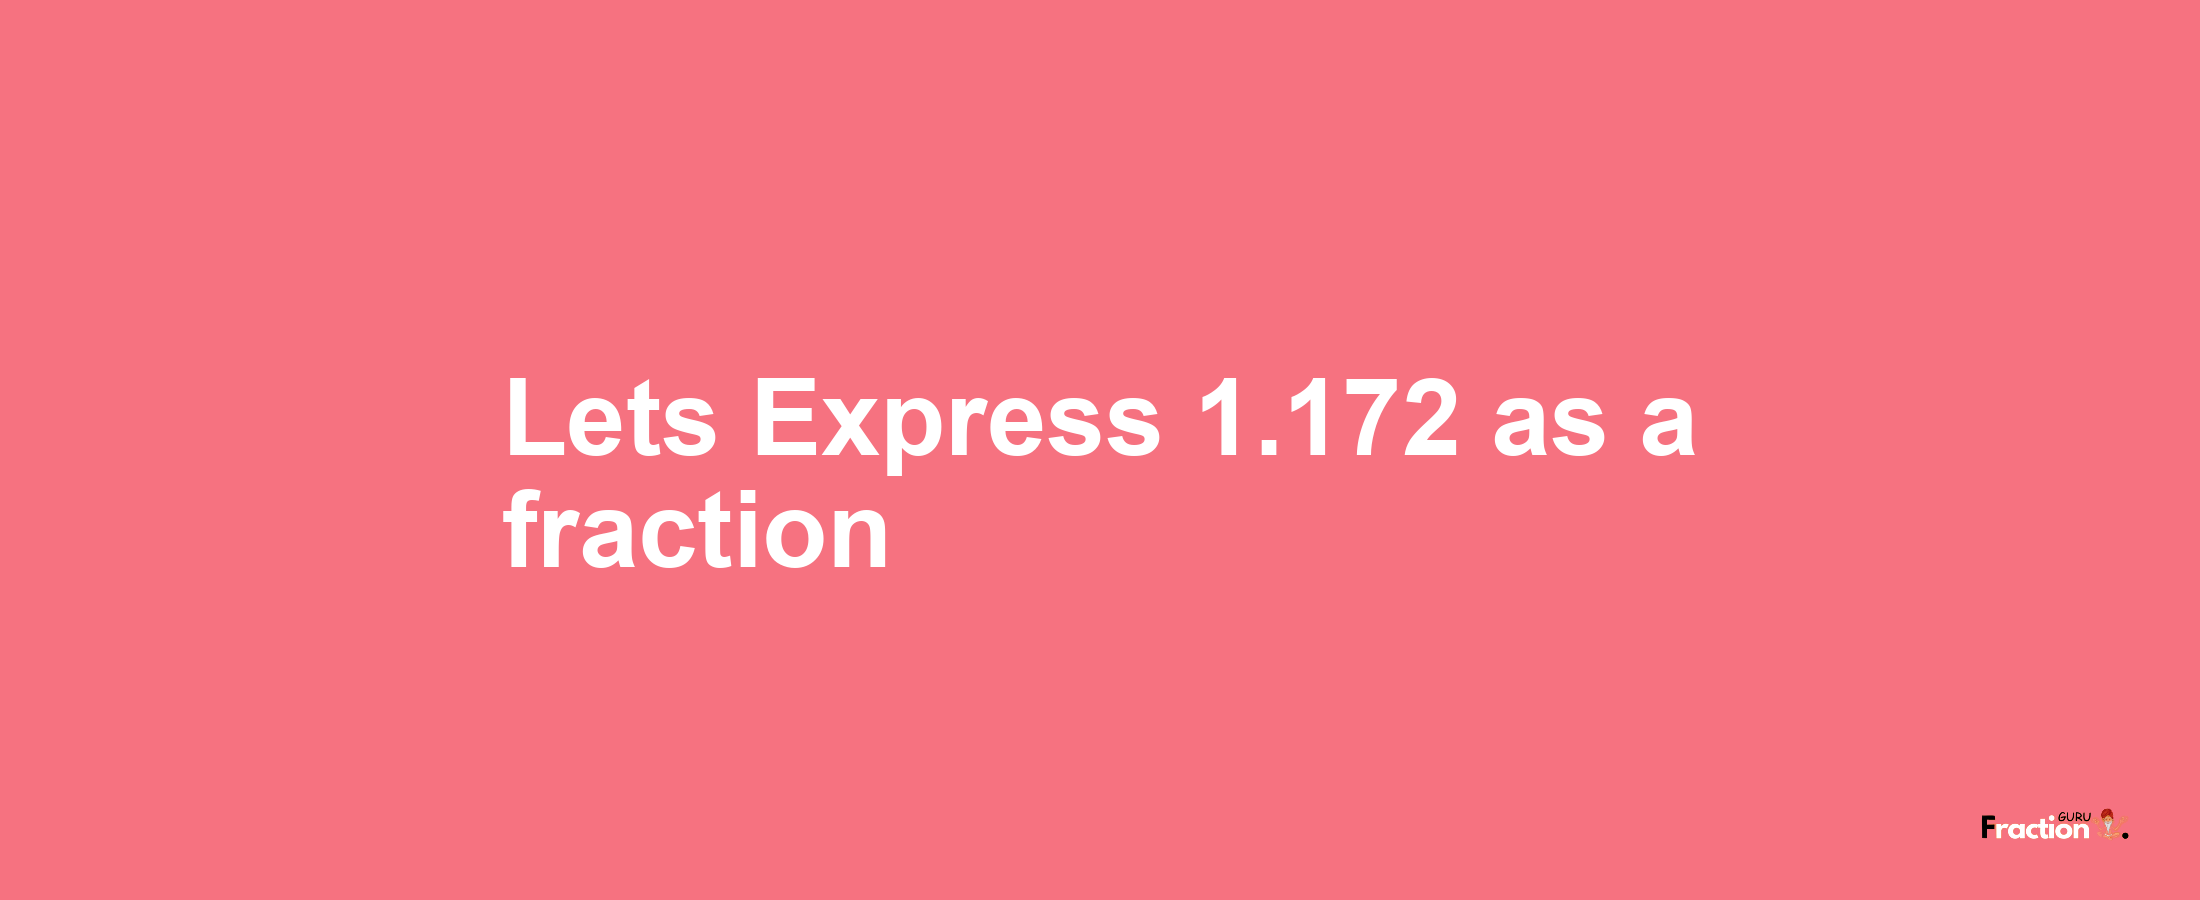 Lets Express 1.172 as afraction